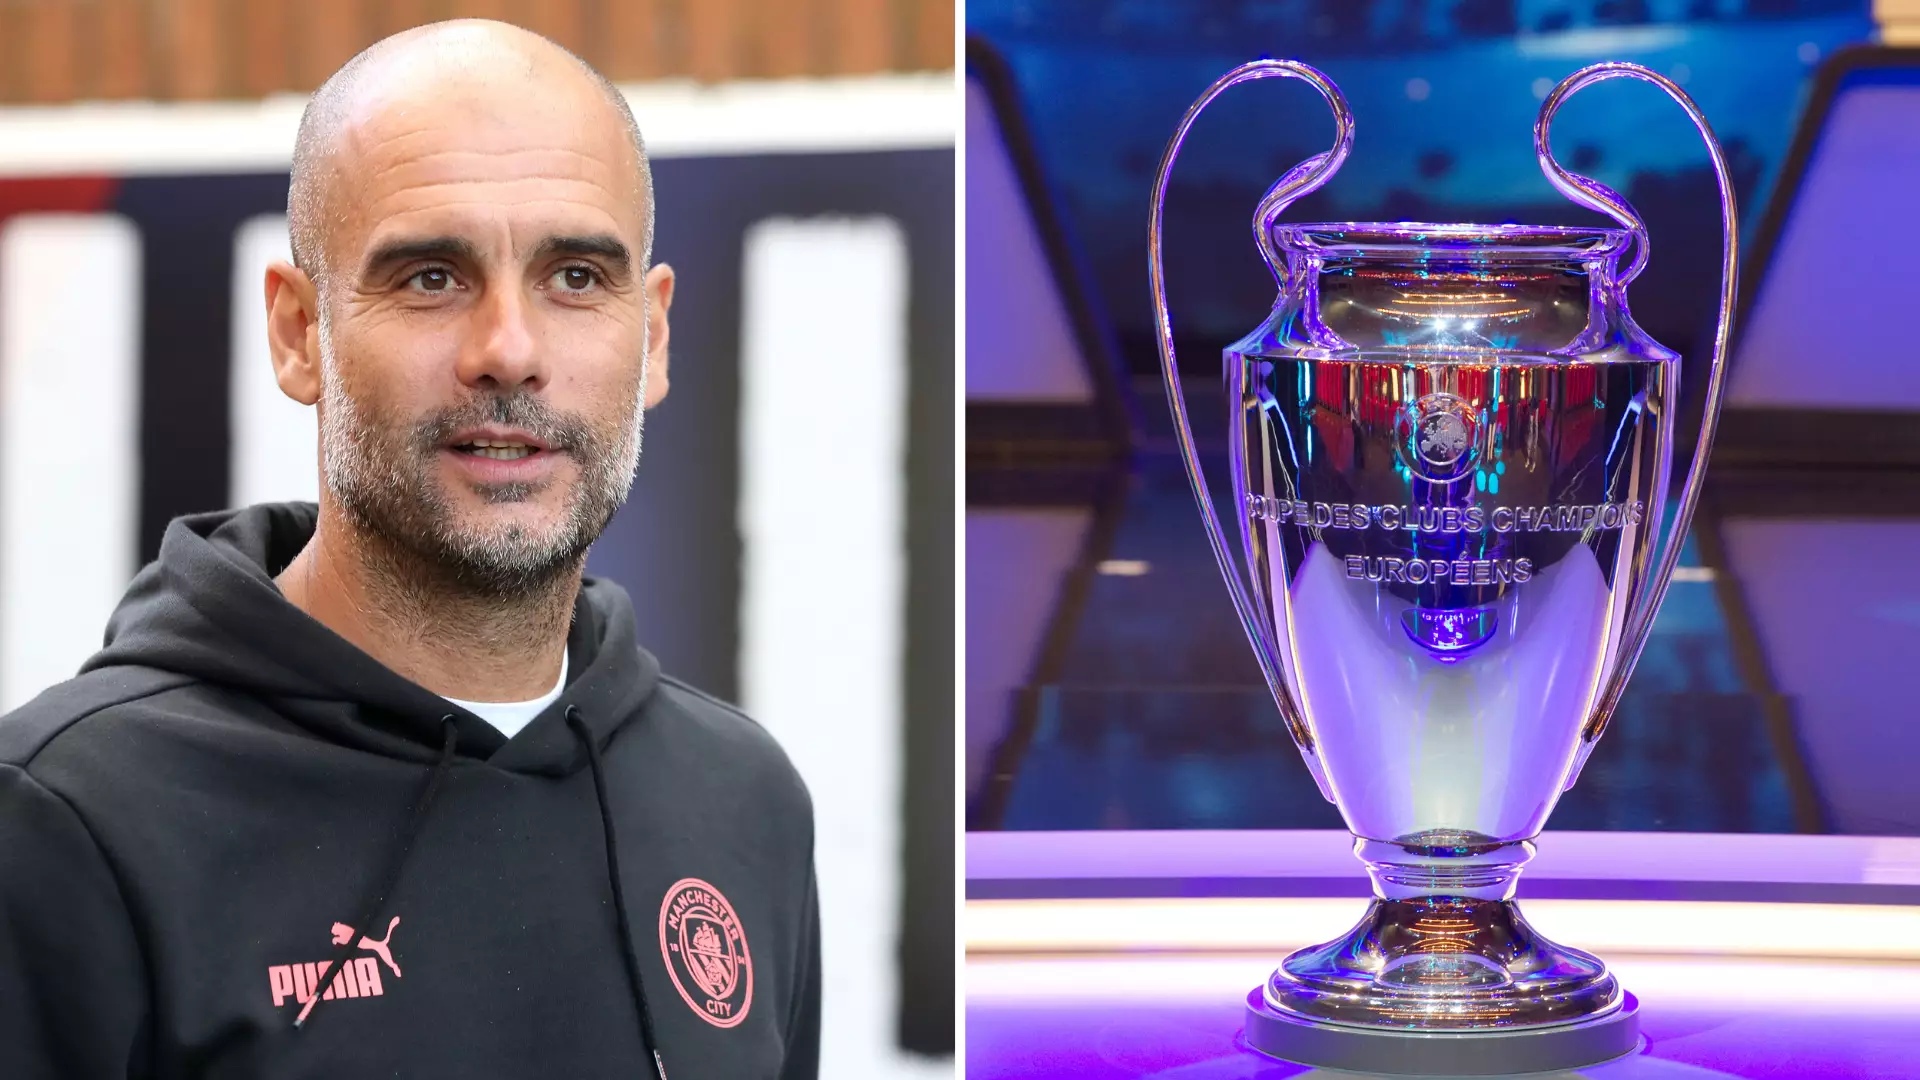 Manchester City Are 'Still Not Ready' To Win The Champions League, Says Pep Guardiola